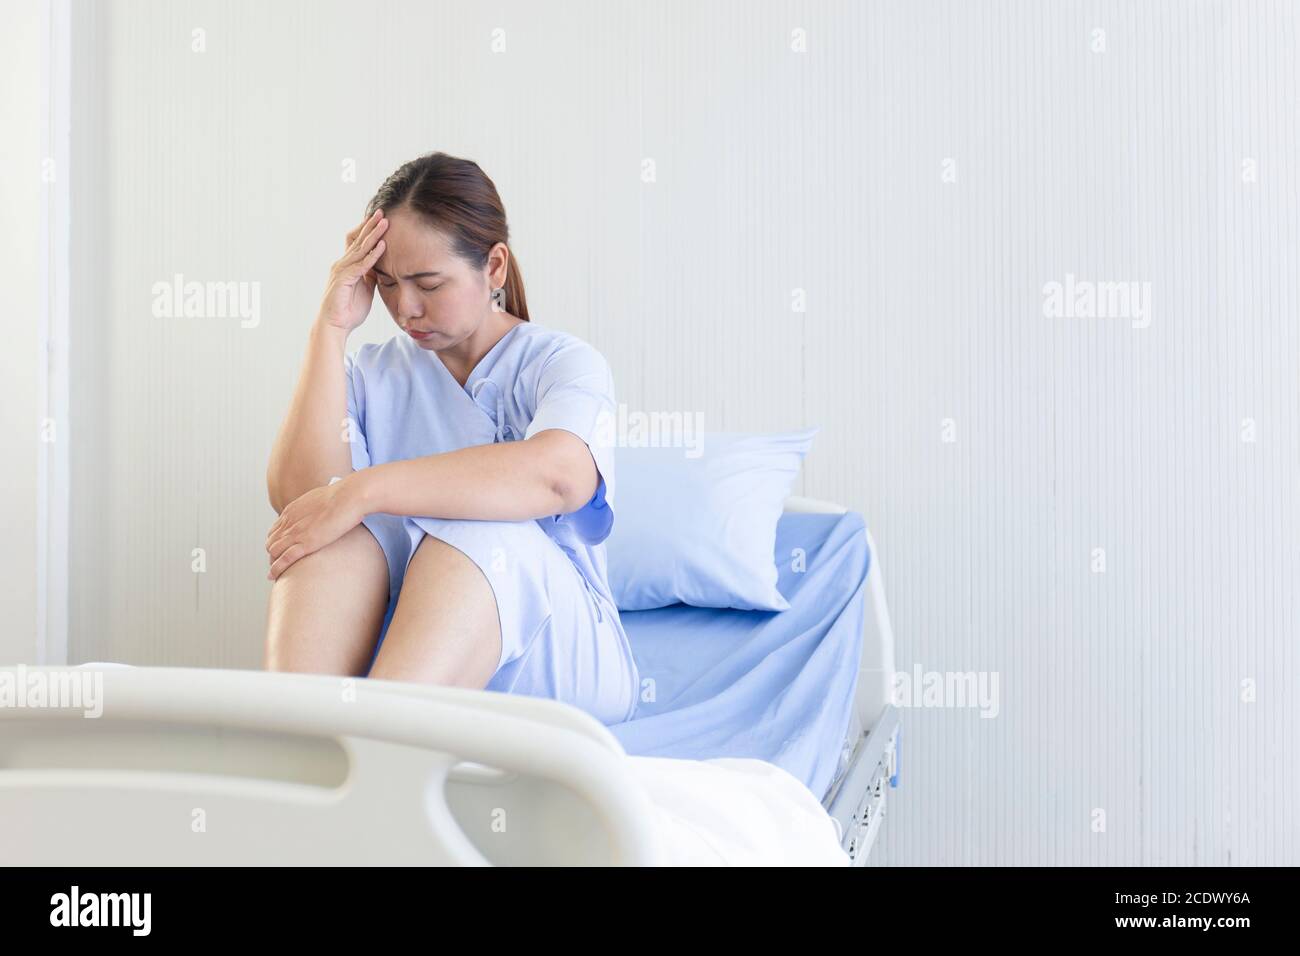 Asian female patients sitting in hospital beds showing discomfort Stock Photo